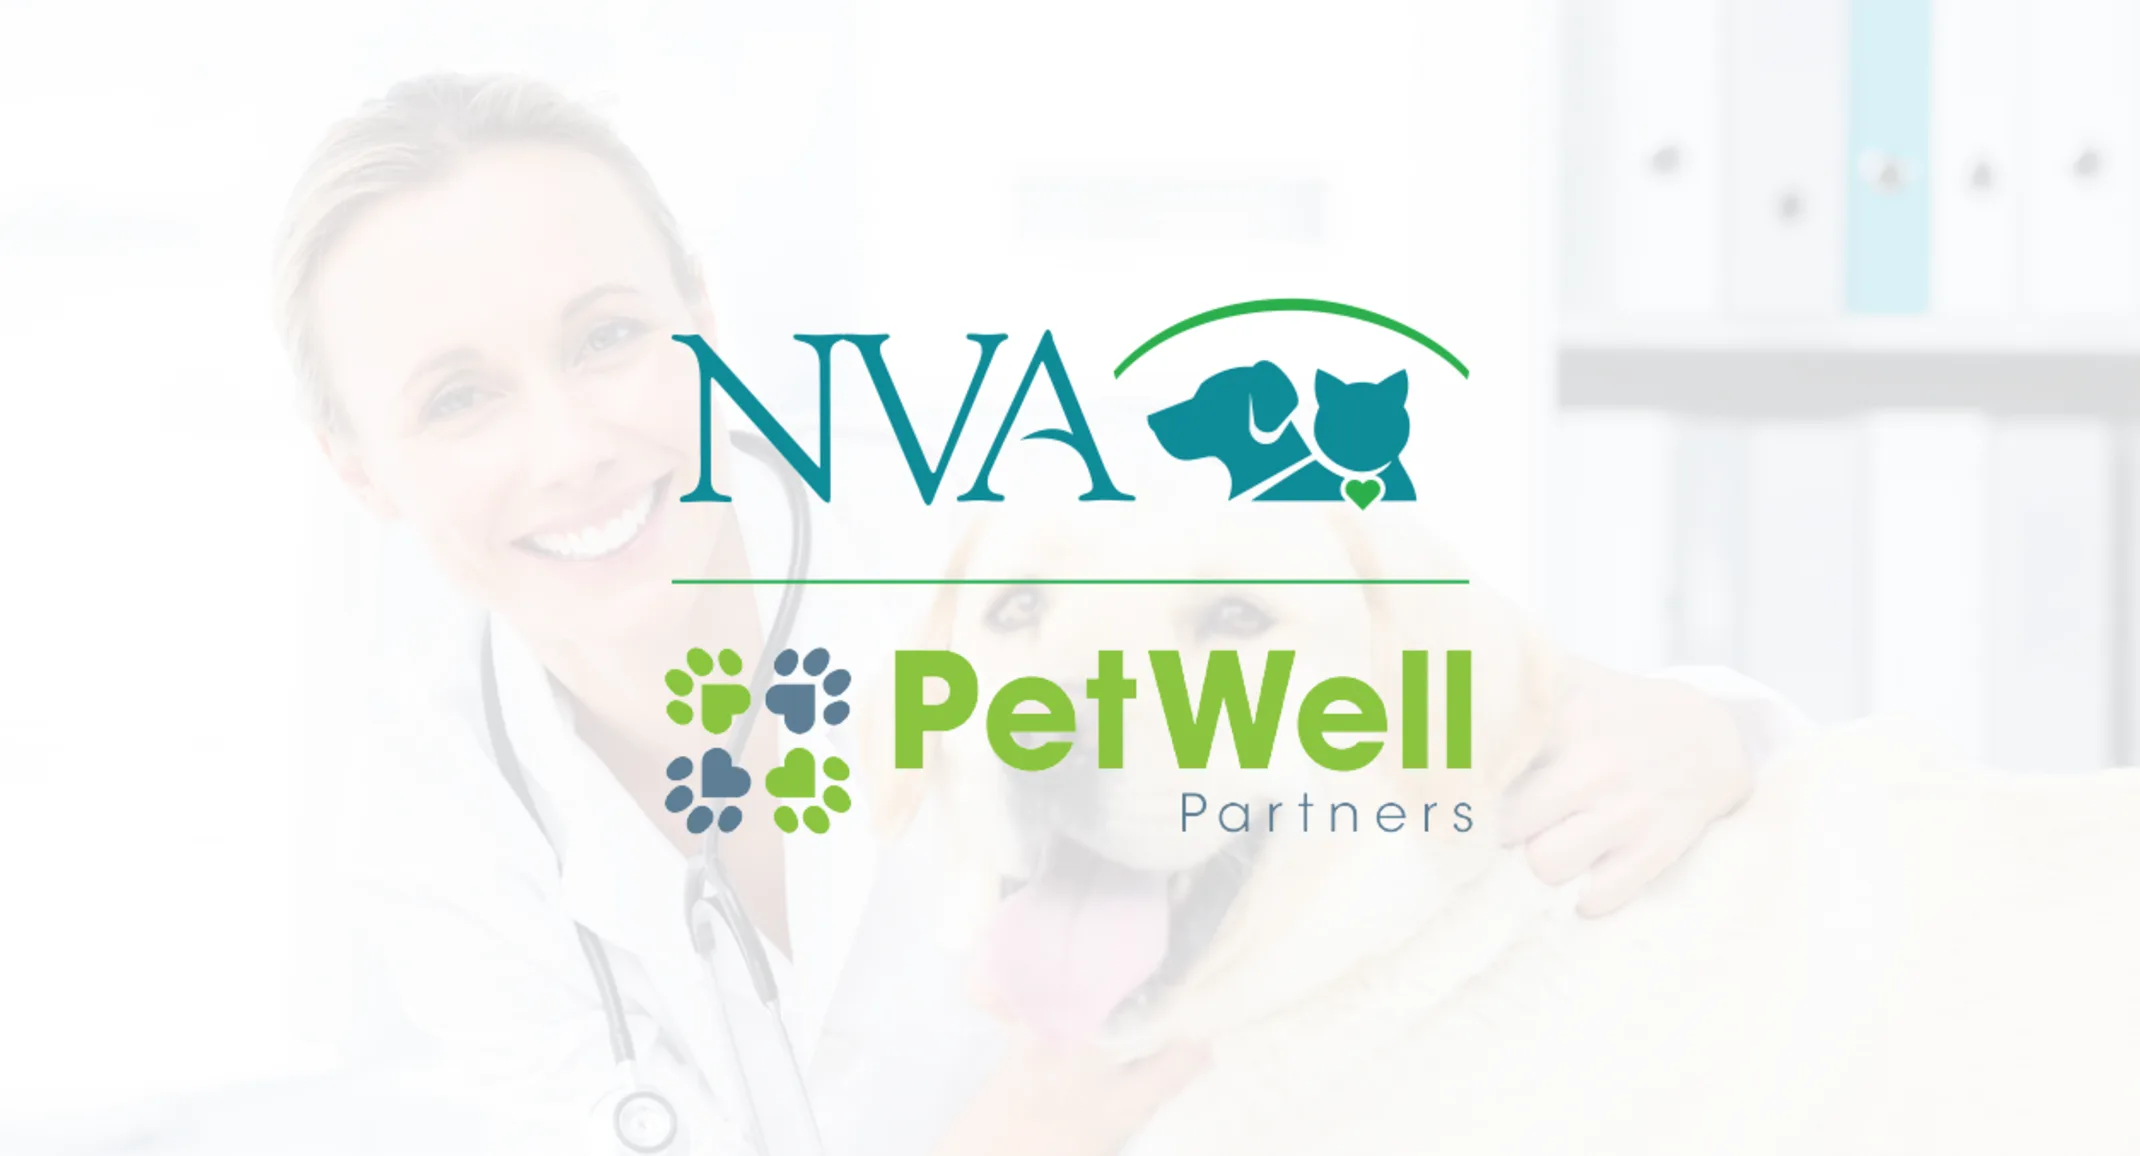 Picture of dog next to NVA logo and PetWell logo